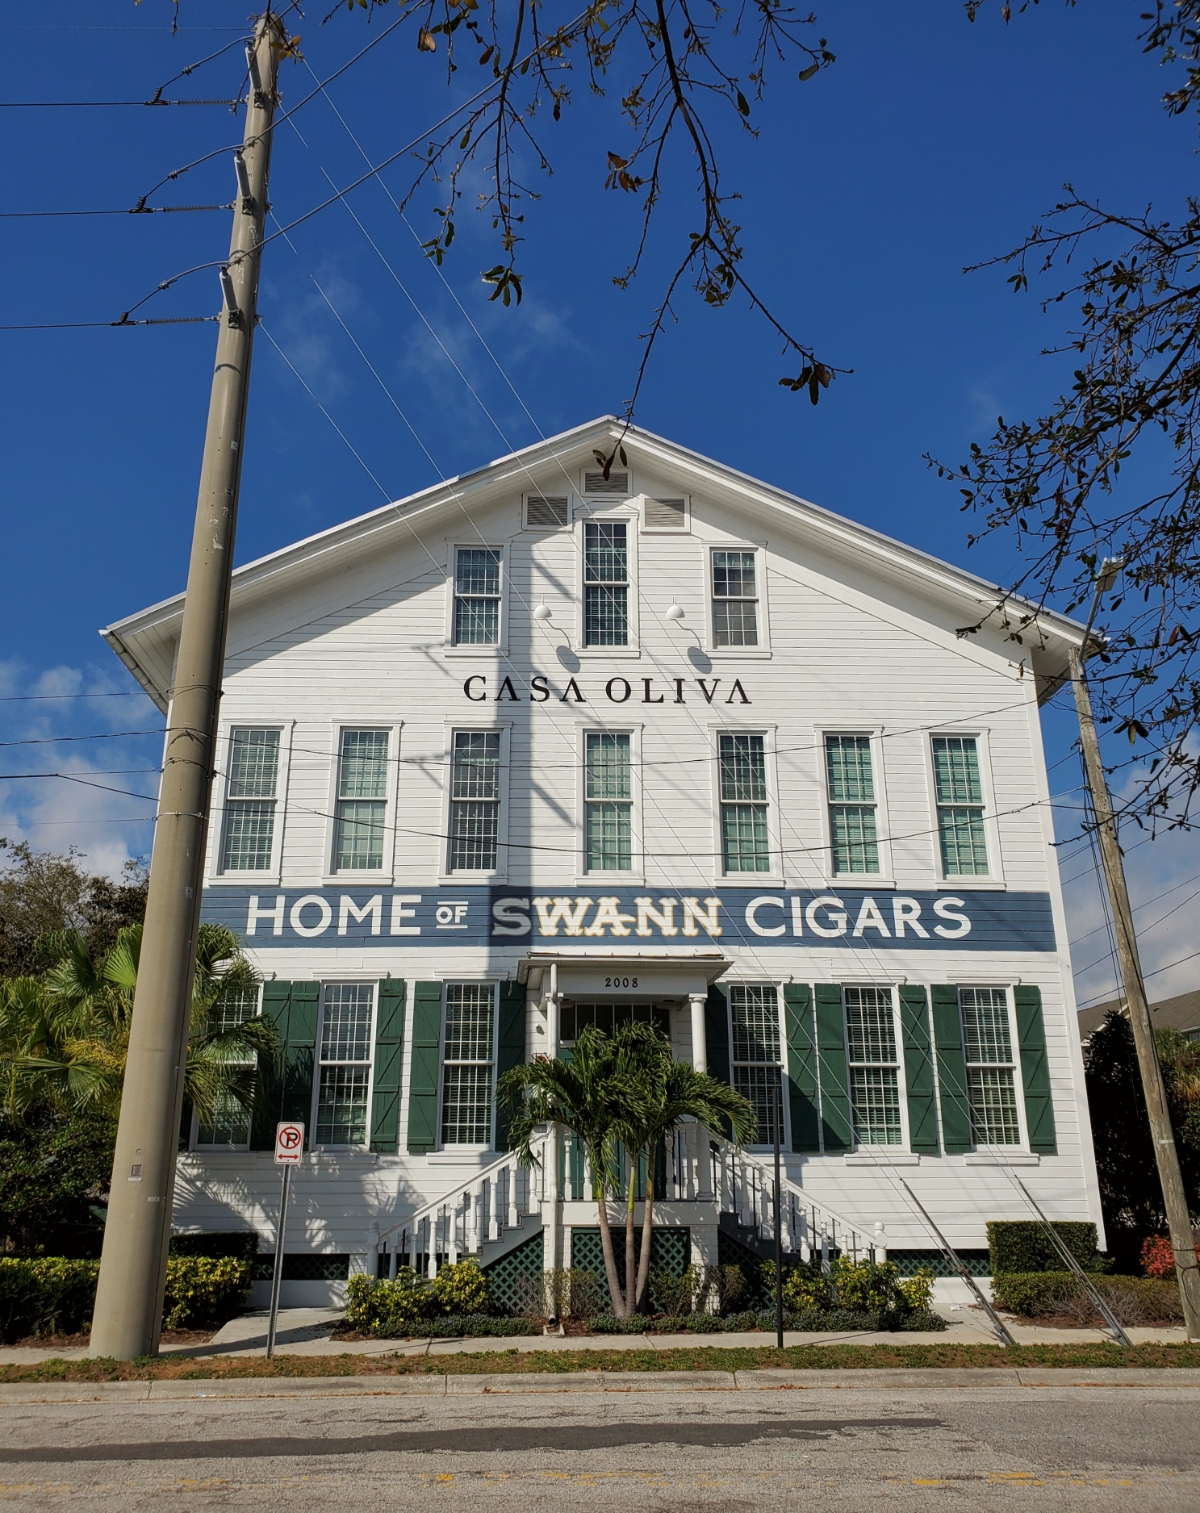 Home of Swann Cigars, now apartments, oldest  and only remaining wooden cigar factory. Built in 1885.